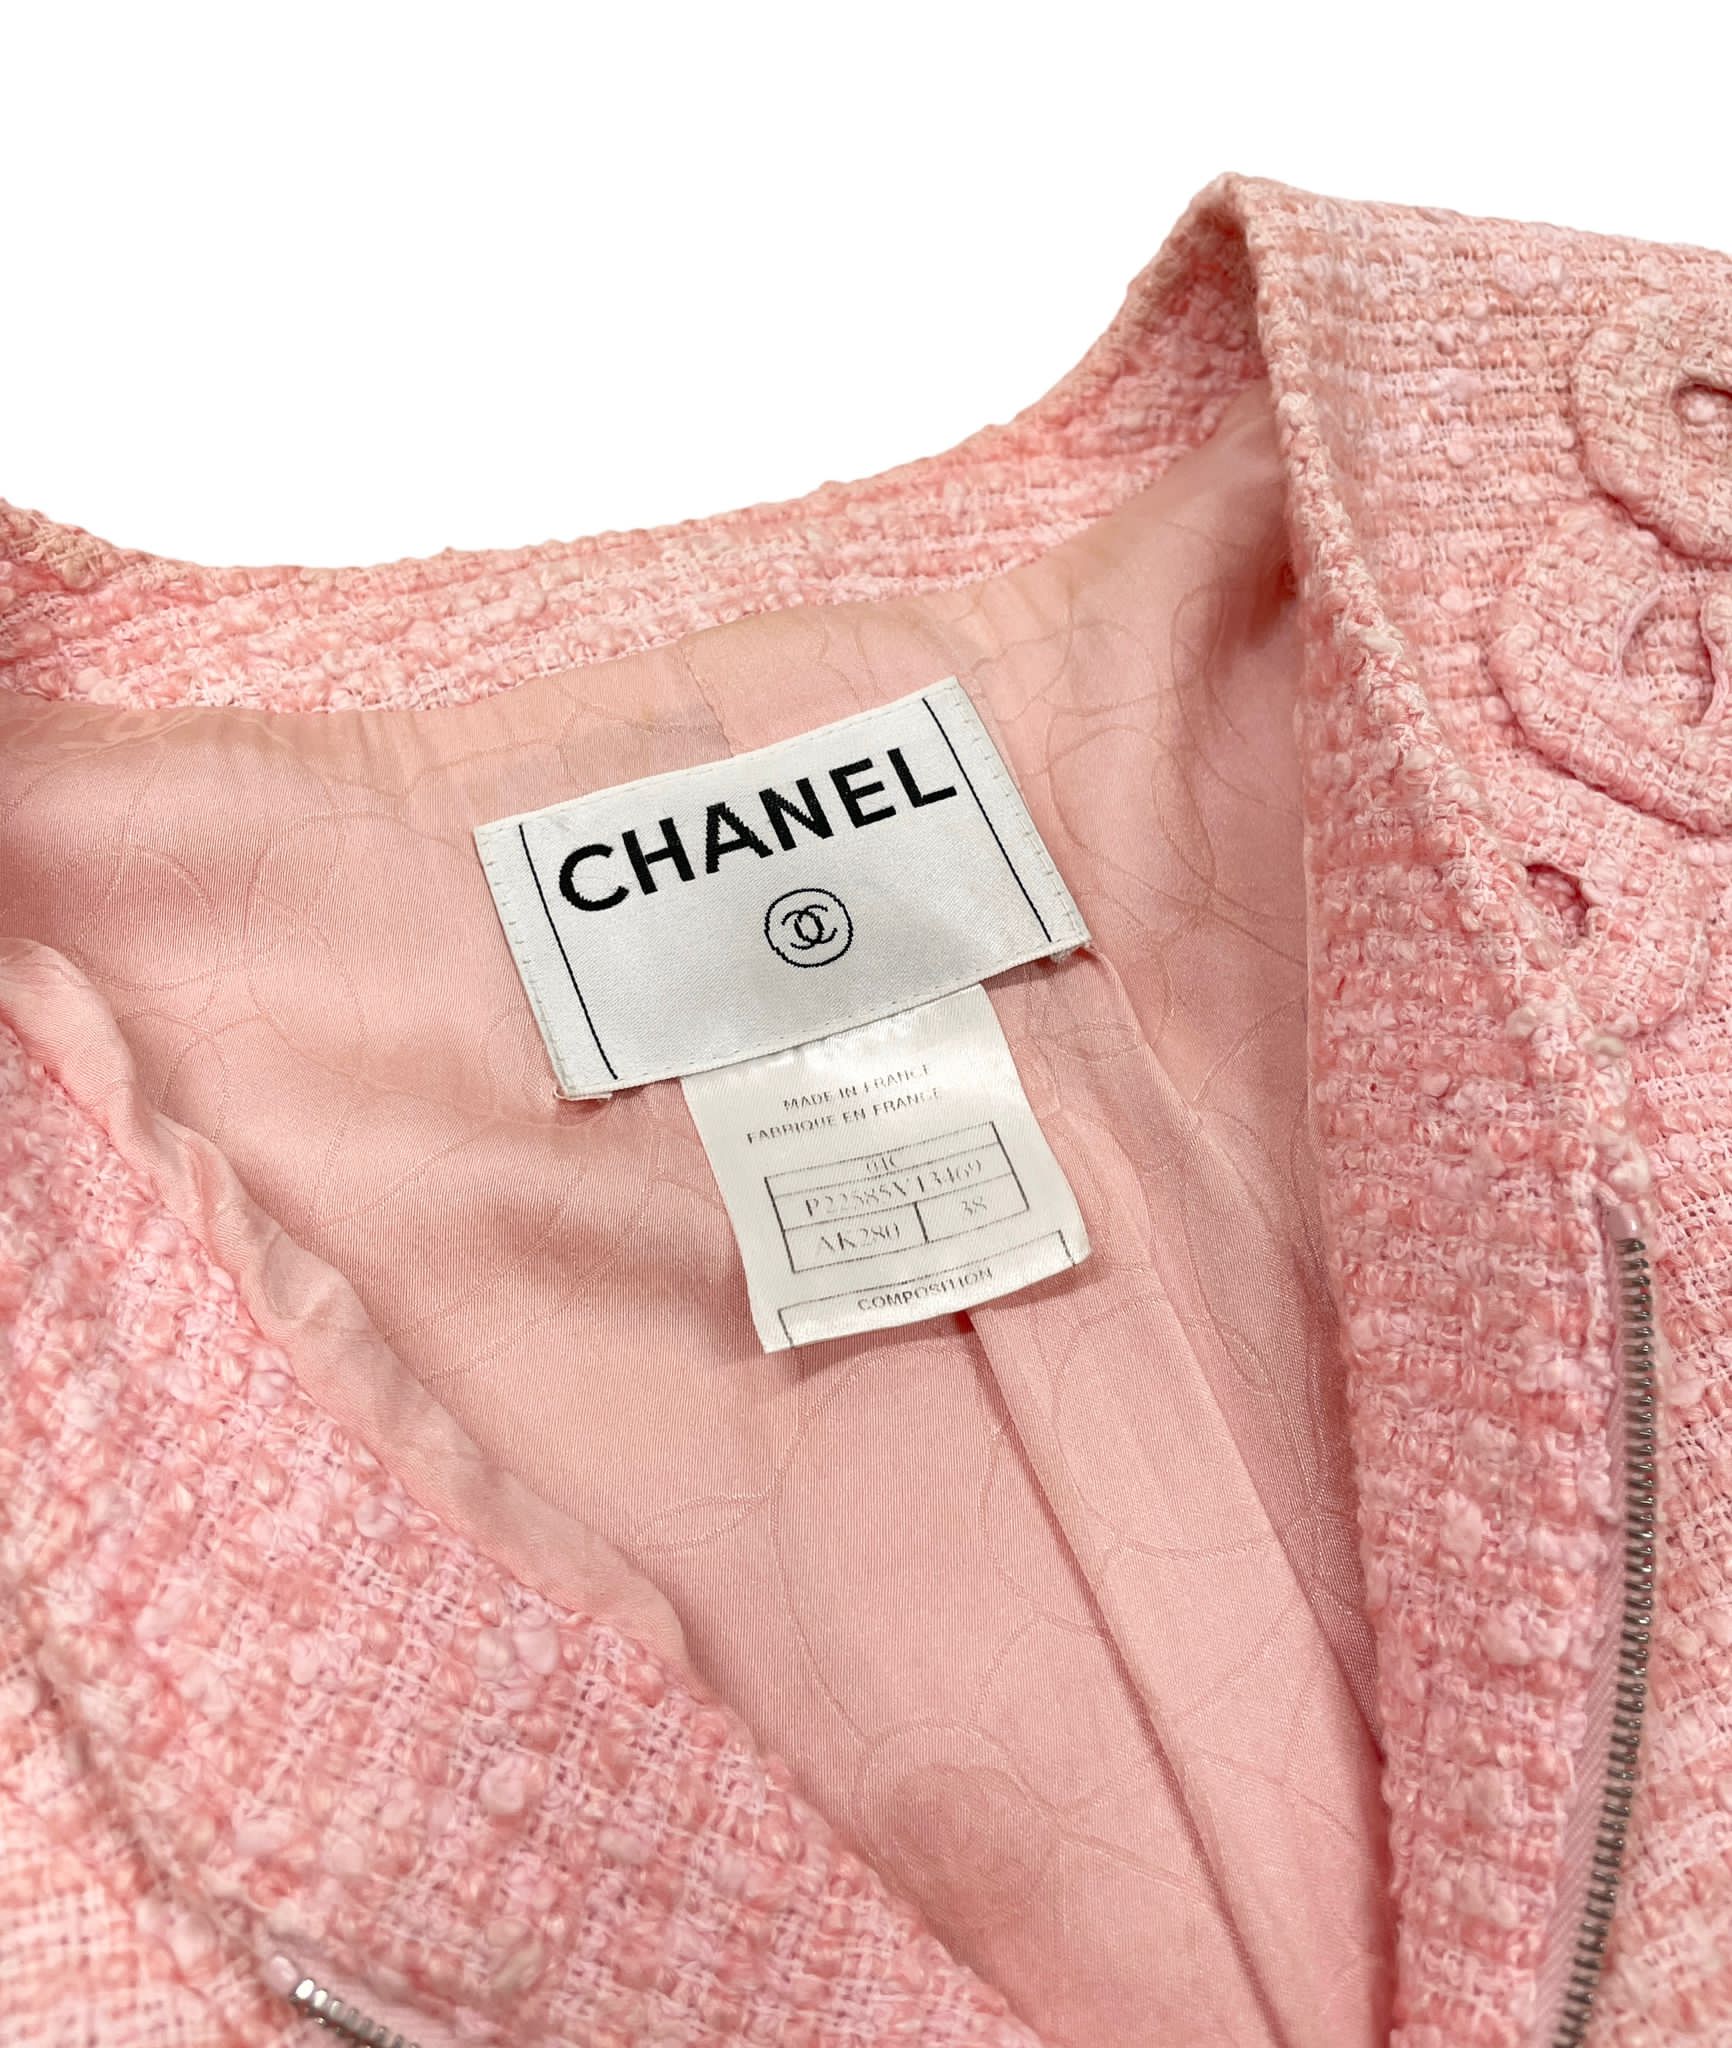 Authentic Chanel Pink Tweed Nylon Top on sale at JHROP. Luxury